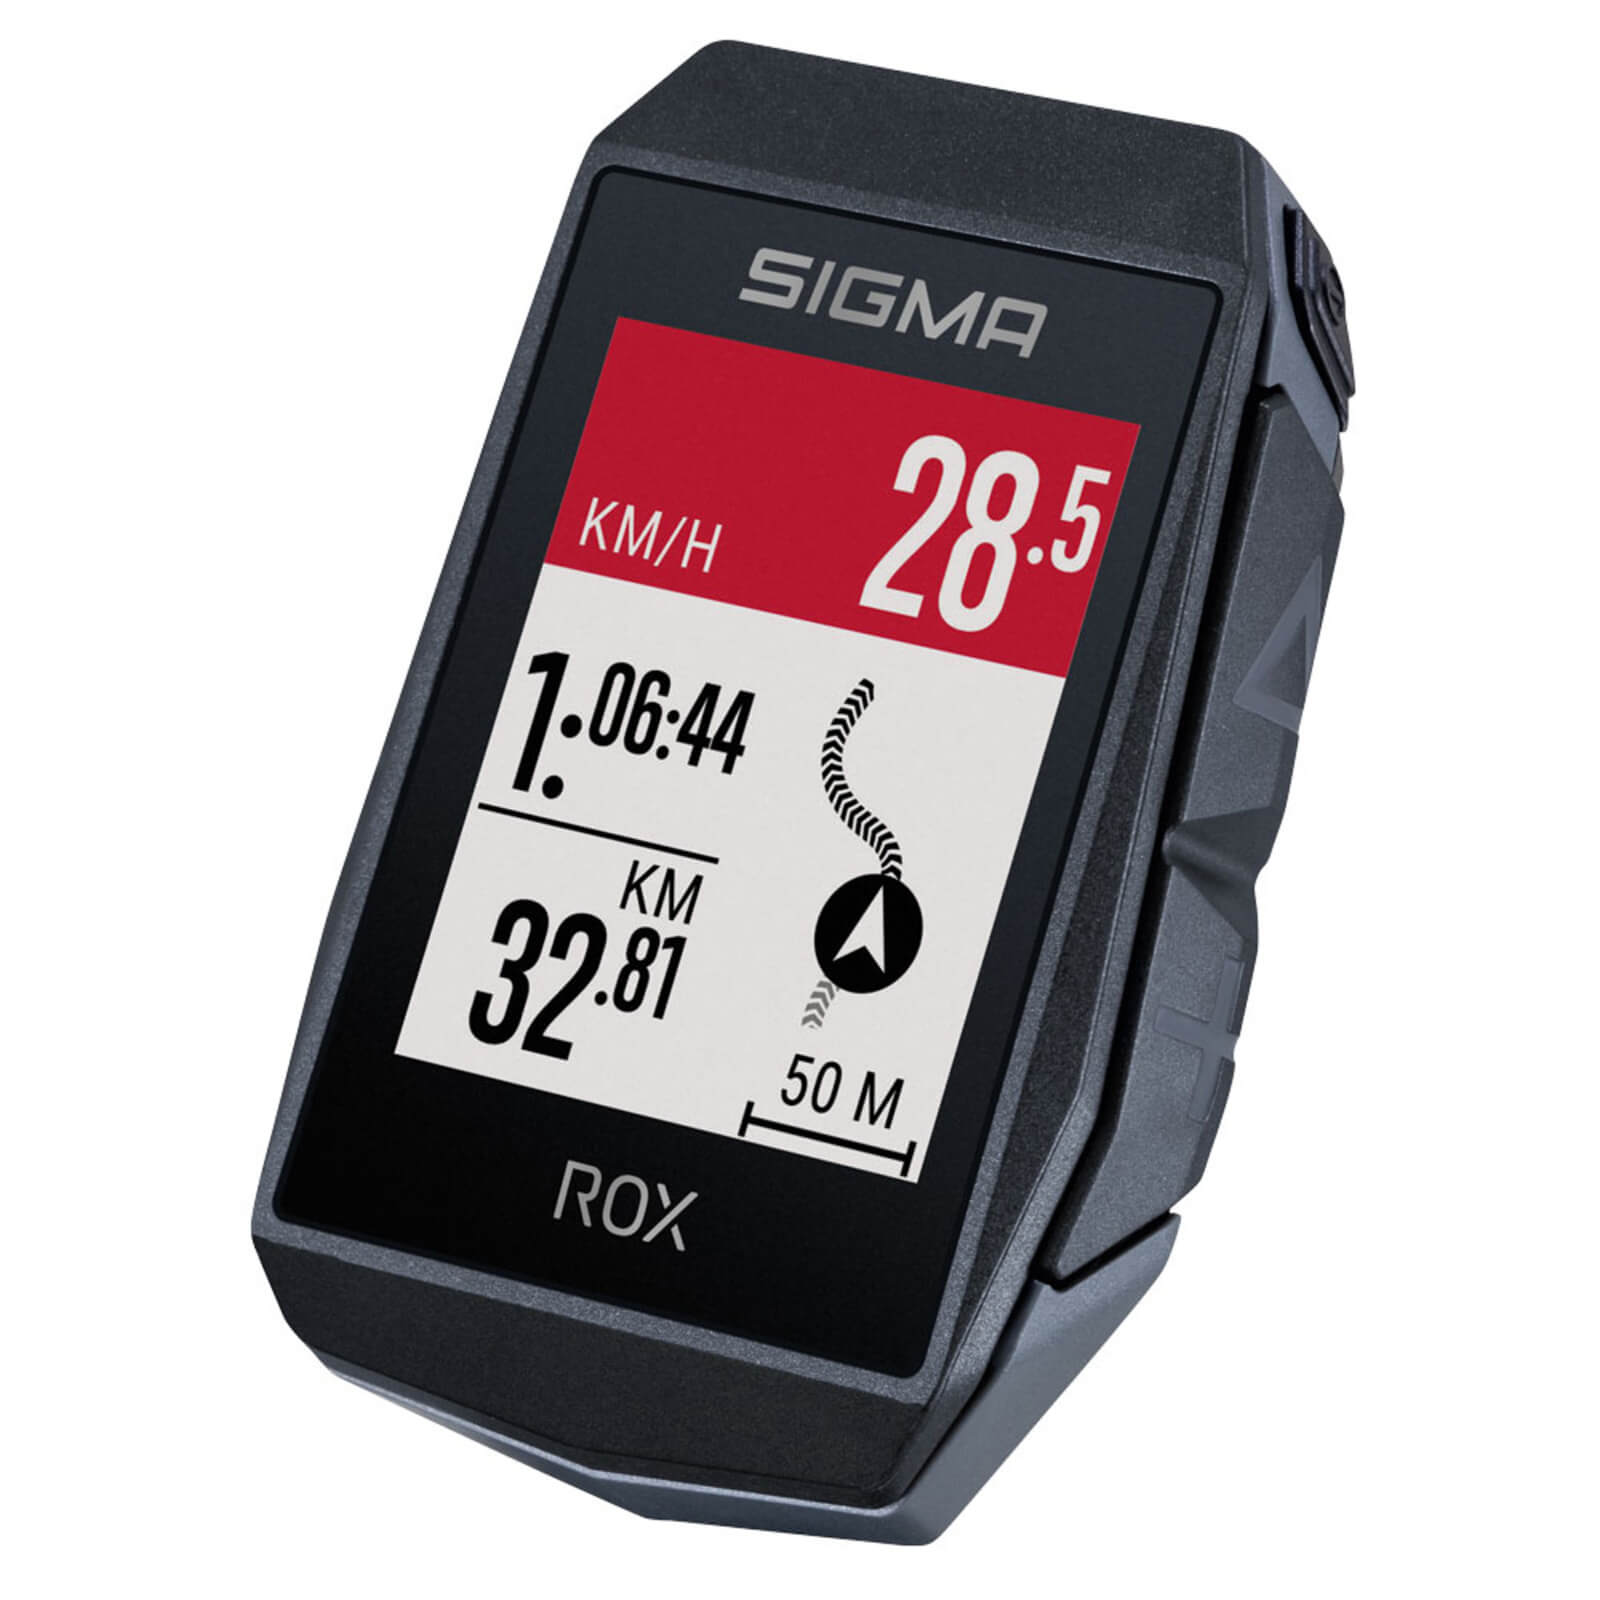 Image of Sigma Rox 11.1 Evo GPS Cycle Computer with HR Monitor - Black